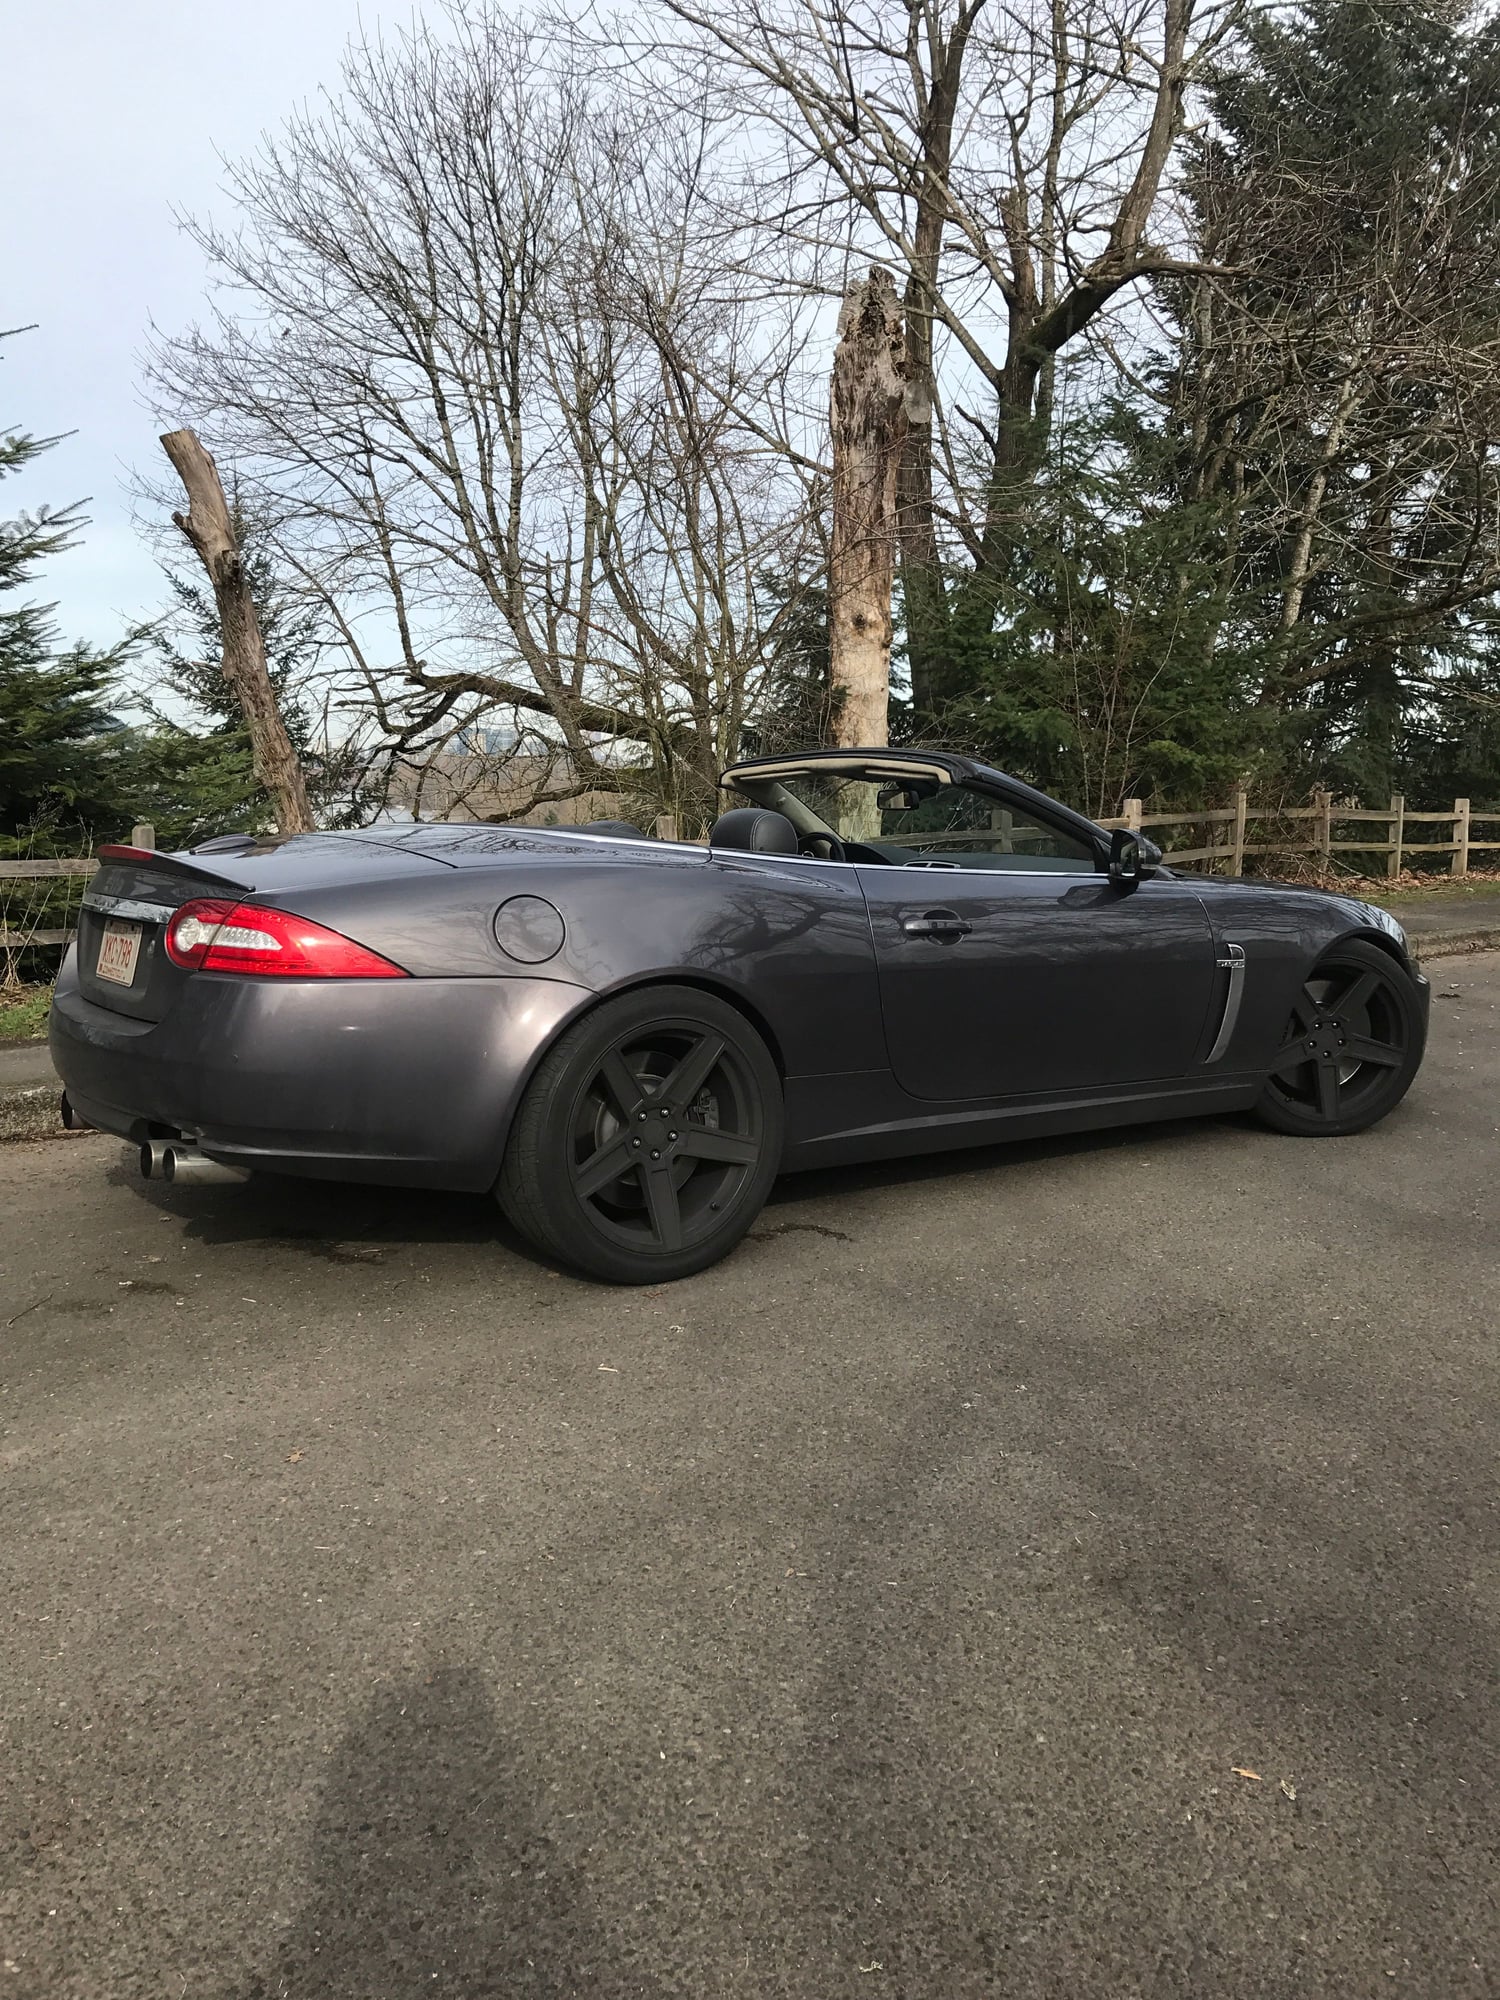 2010 Jaguar XKR - 2010 XKR Convertible - Used - VIN SAJWA4EC8AMB38627 - 108,000 Miles - 8 cyl - 2WD - Automatic - Convertible - Gray - Portland, OR 97202, United States